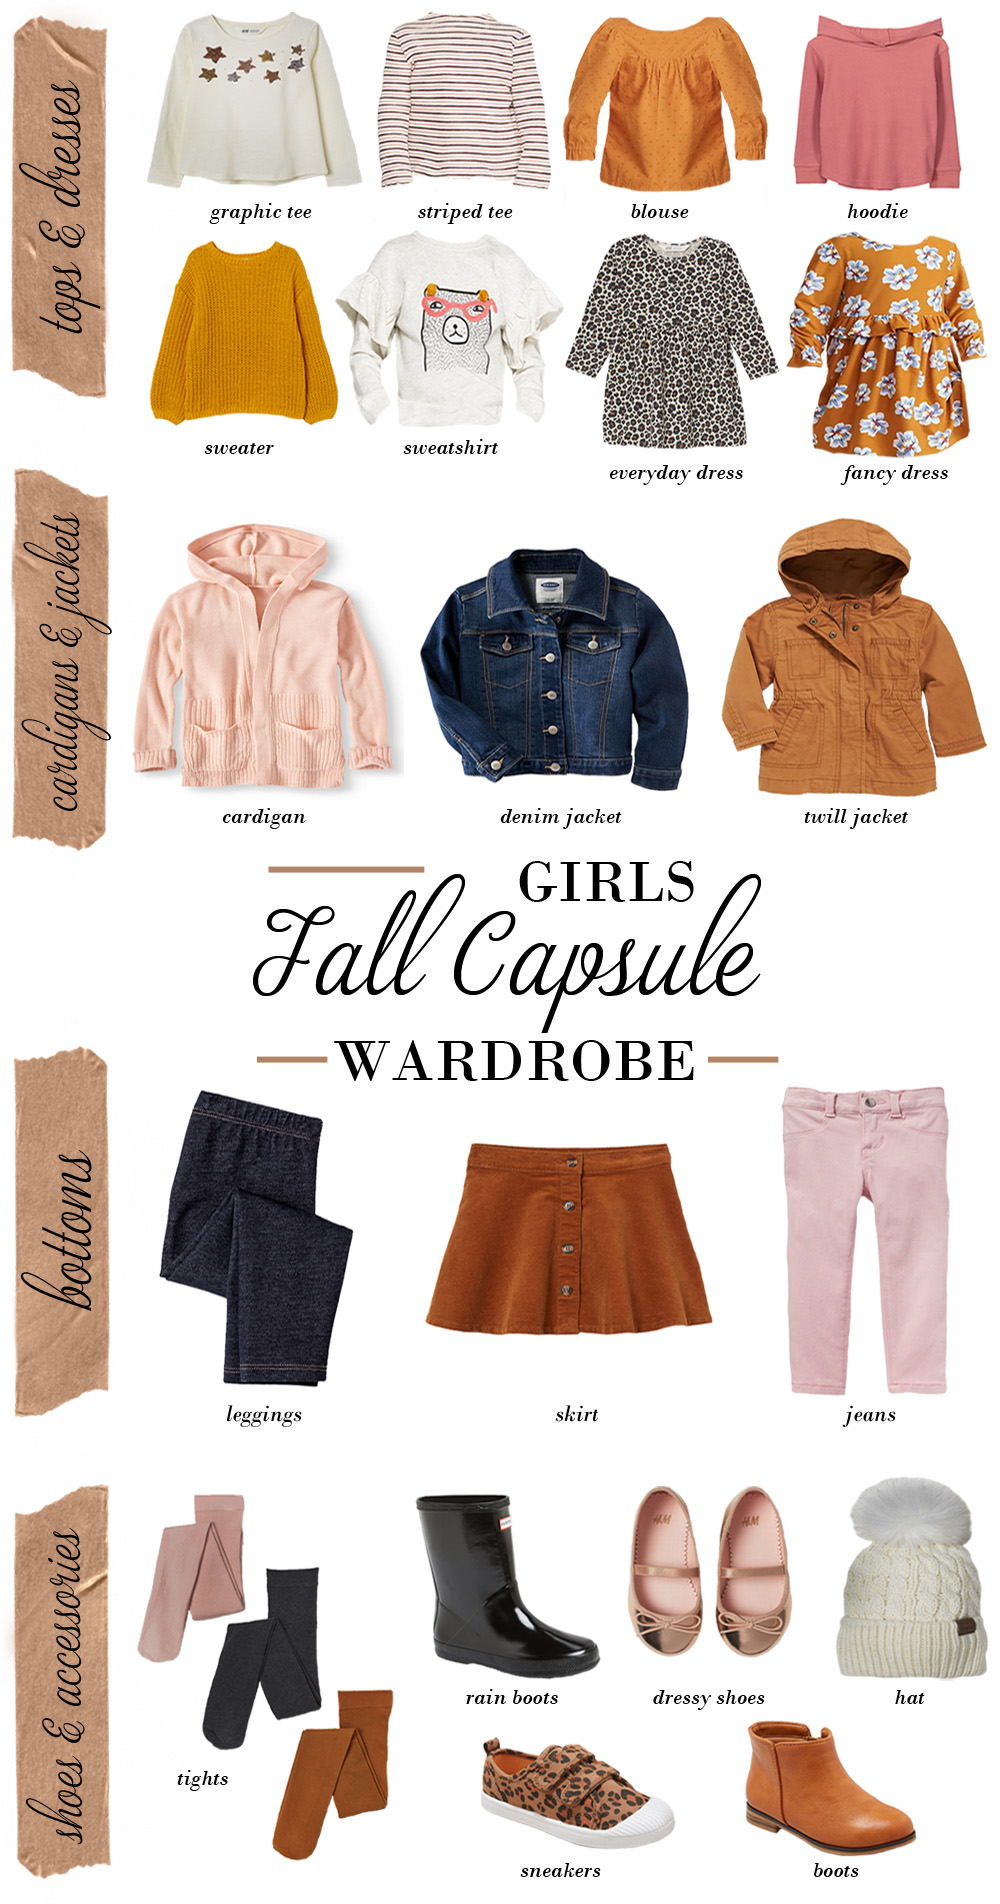 The Every Day Capsule Wardrobe